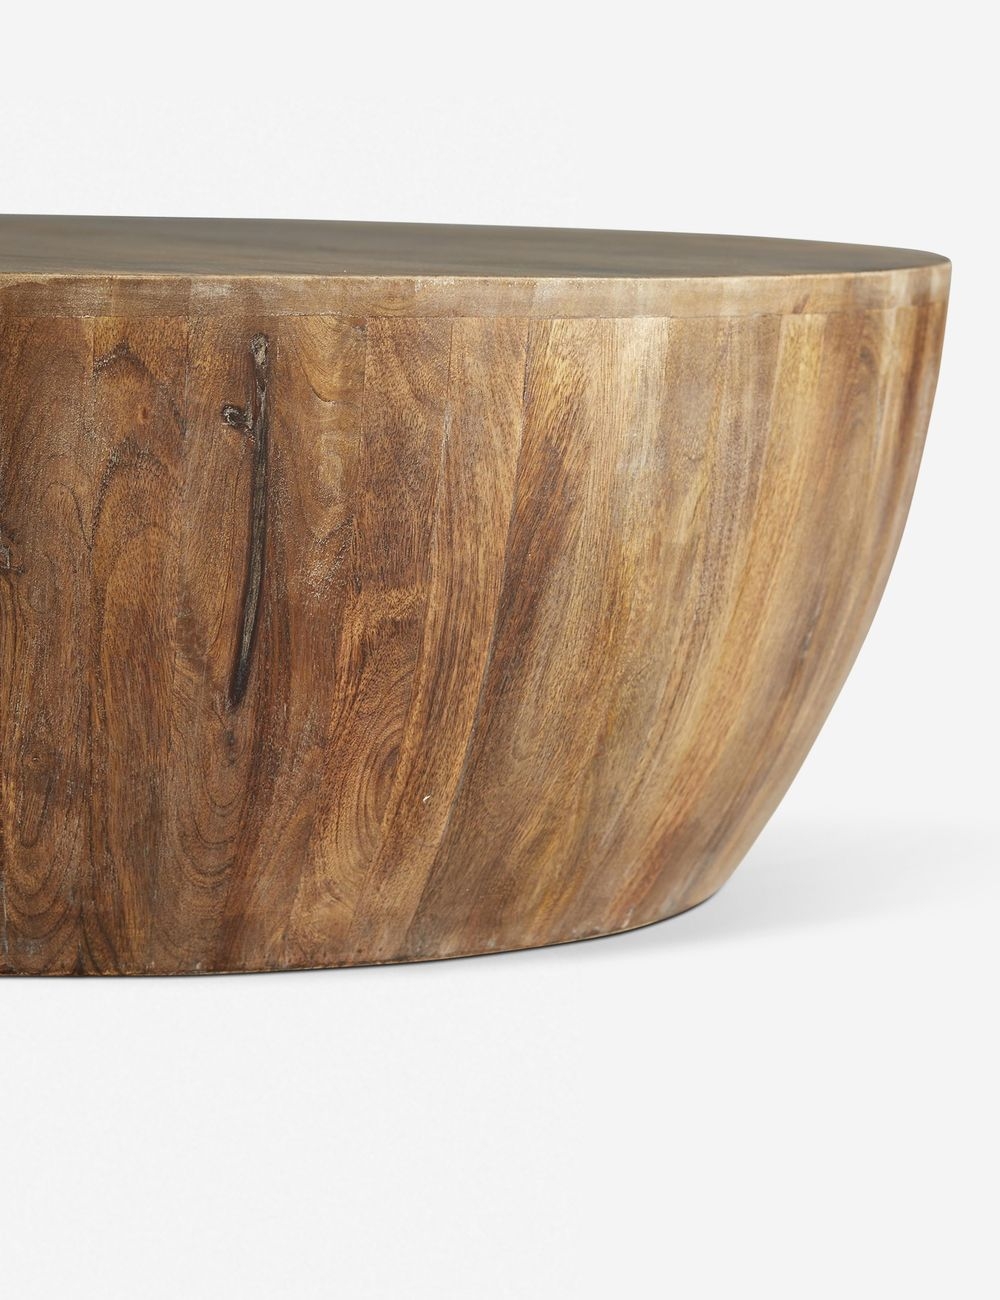 ARTERIORS JACOB COFFEE TABLE, WASHED TOBACCO - Image 2